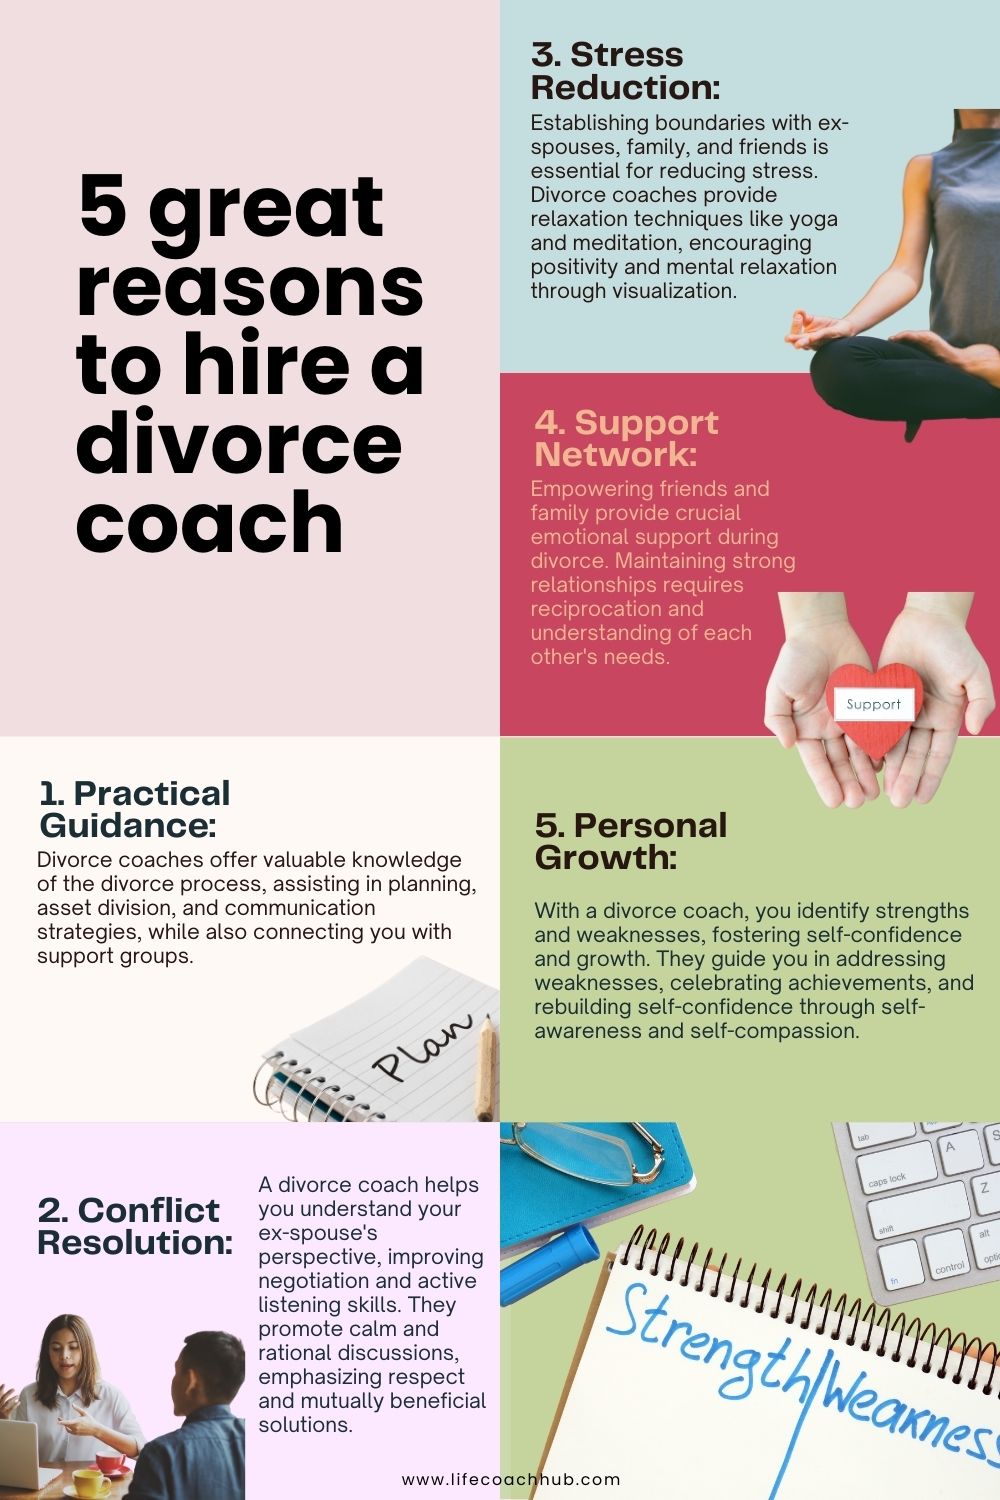 5 great reasons to hire a divorce coach